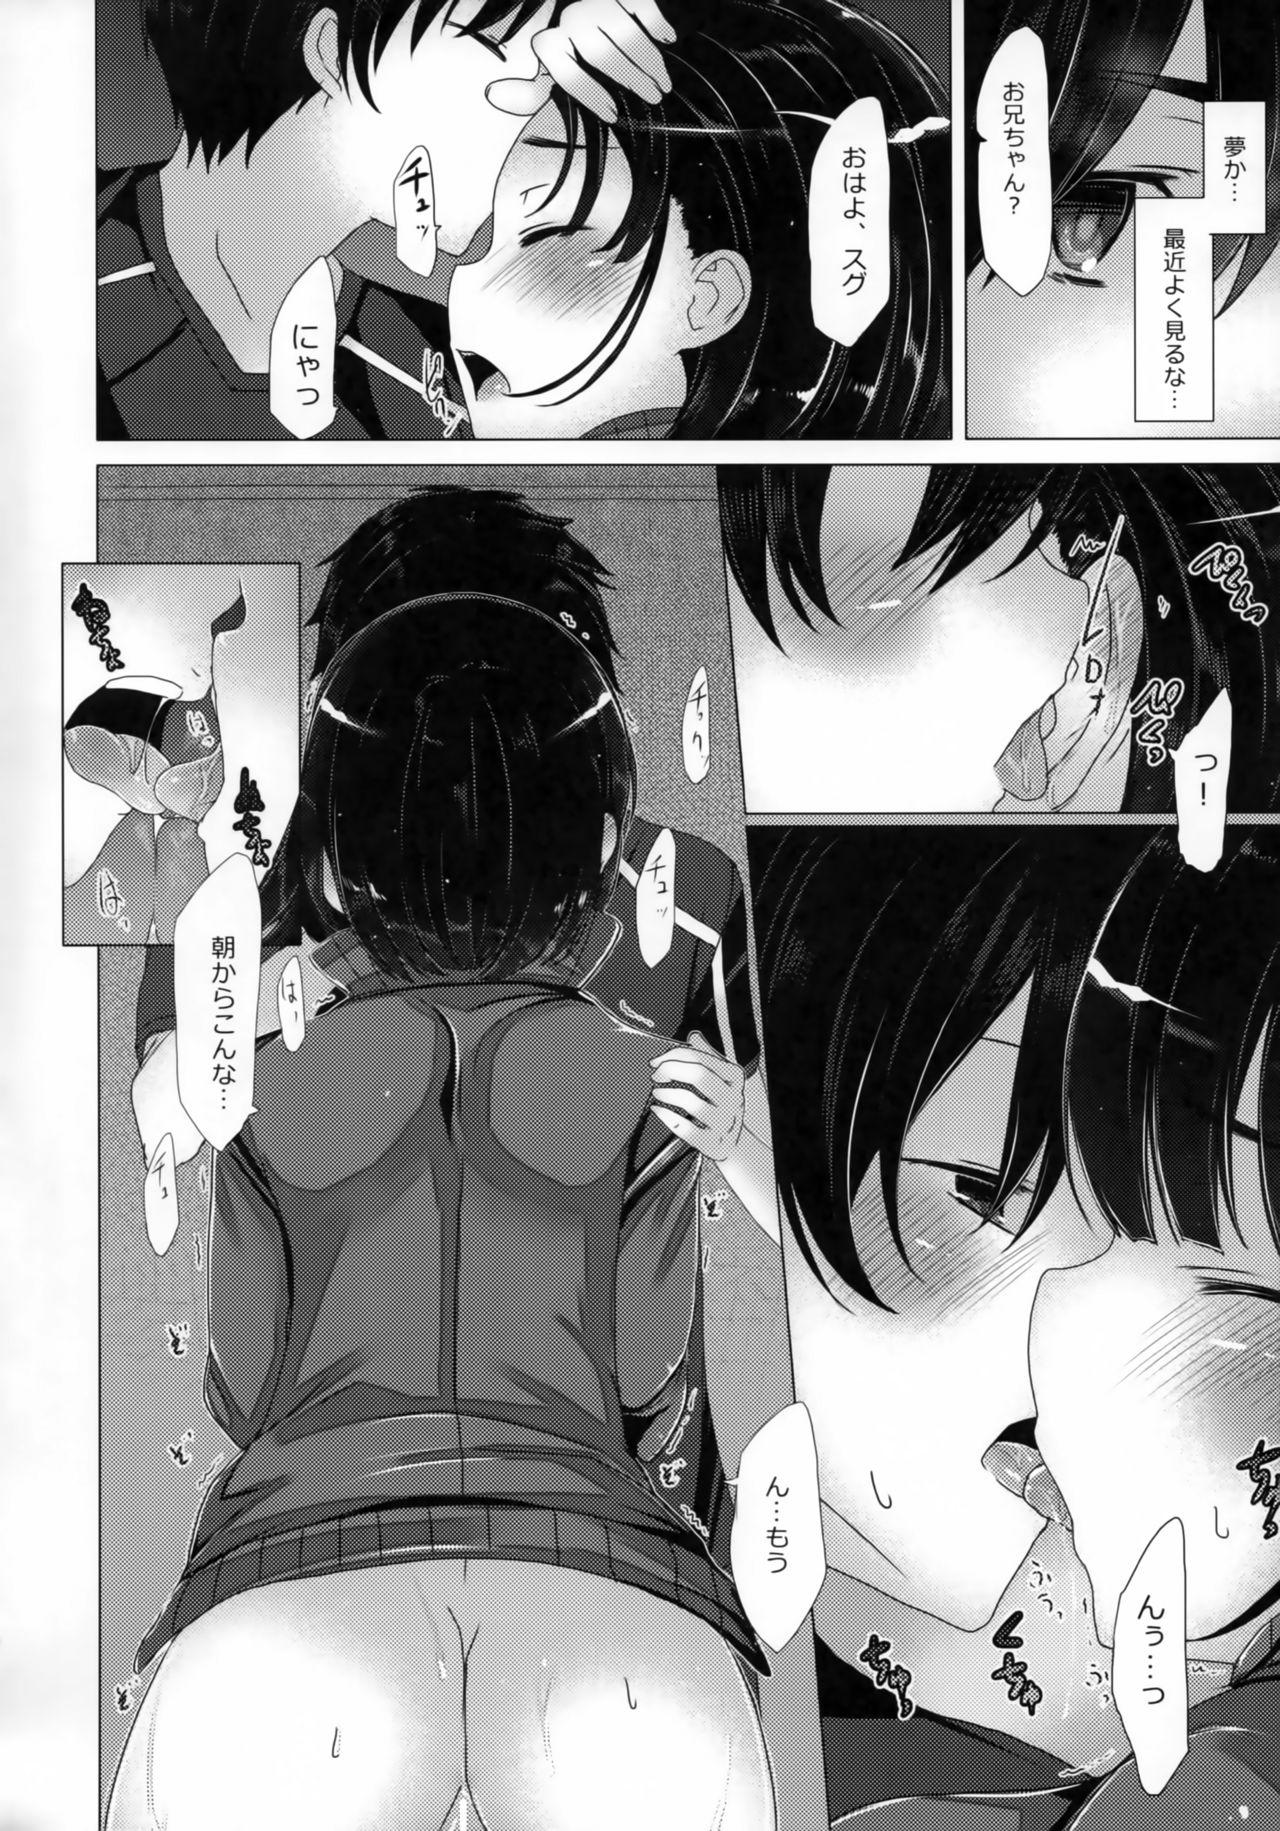 Tanned Reach out Your hands - Sword art online Infiel - Page 5